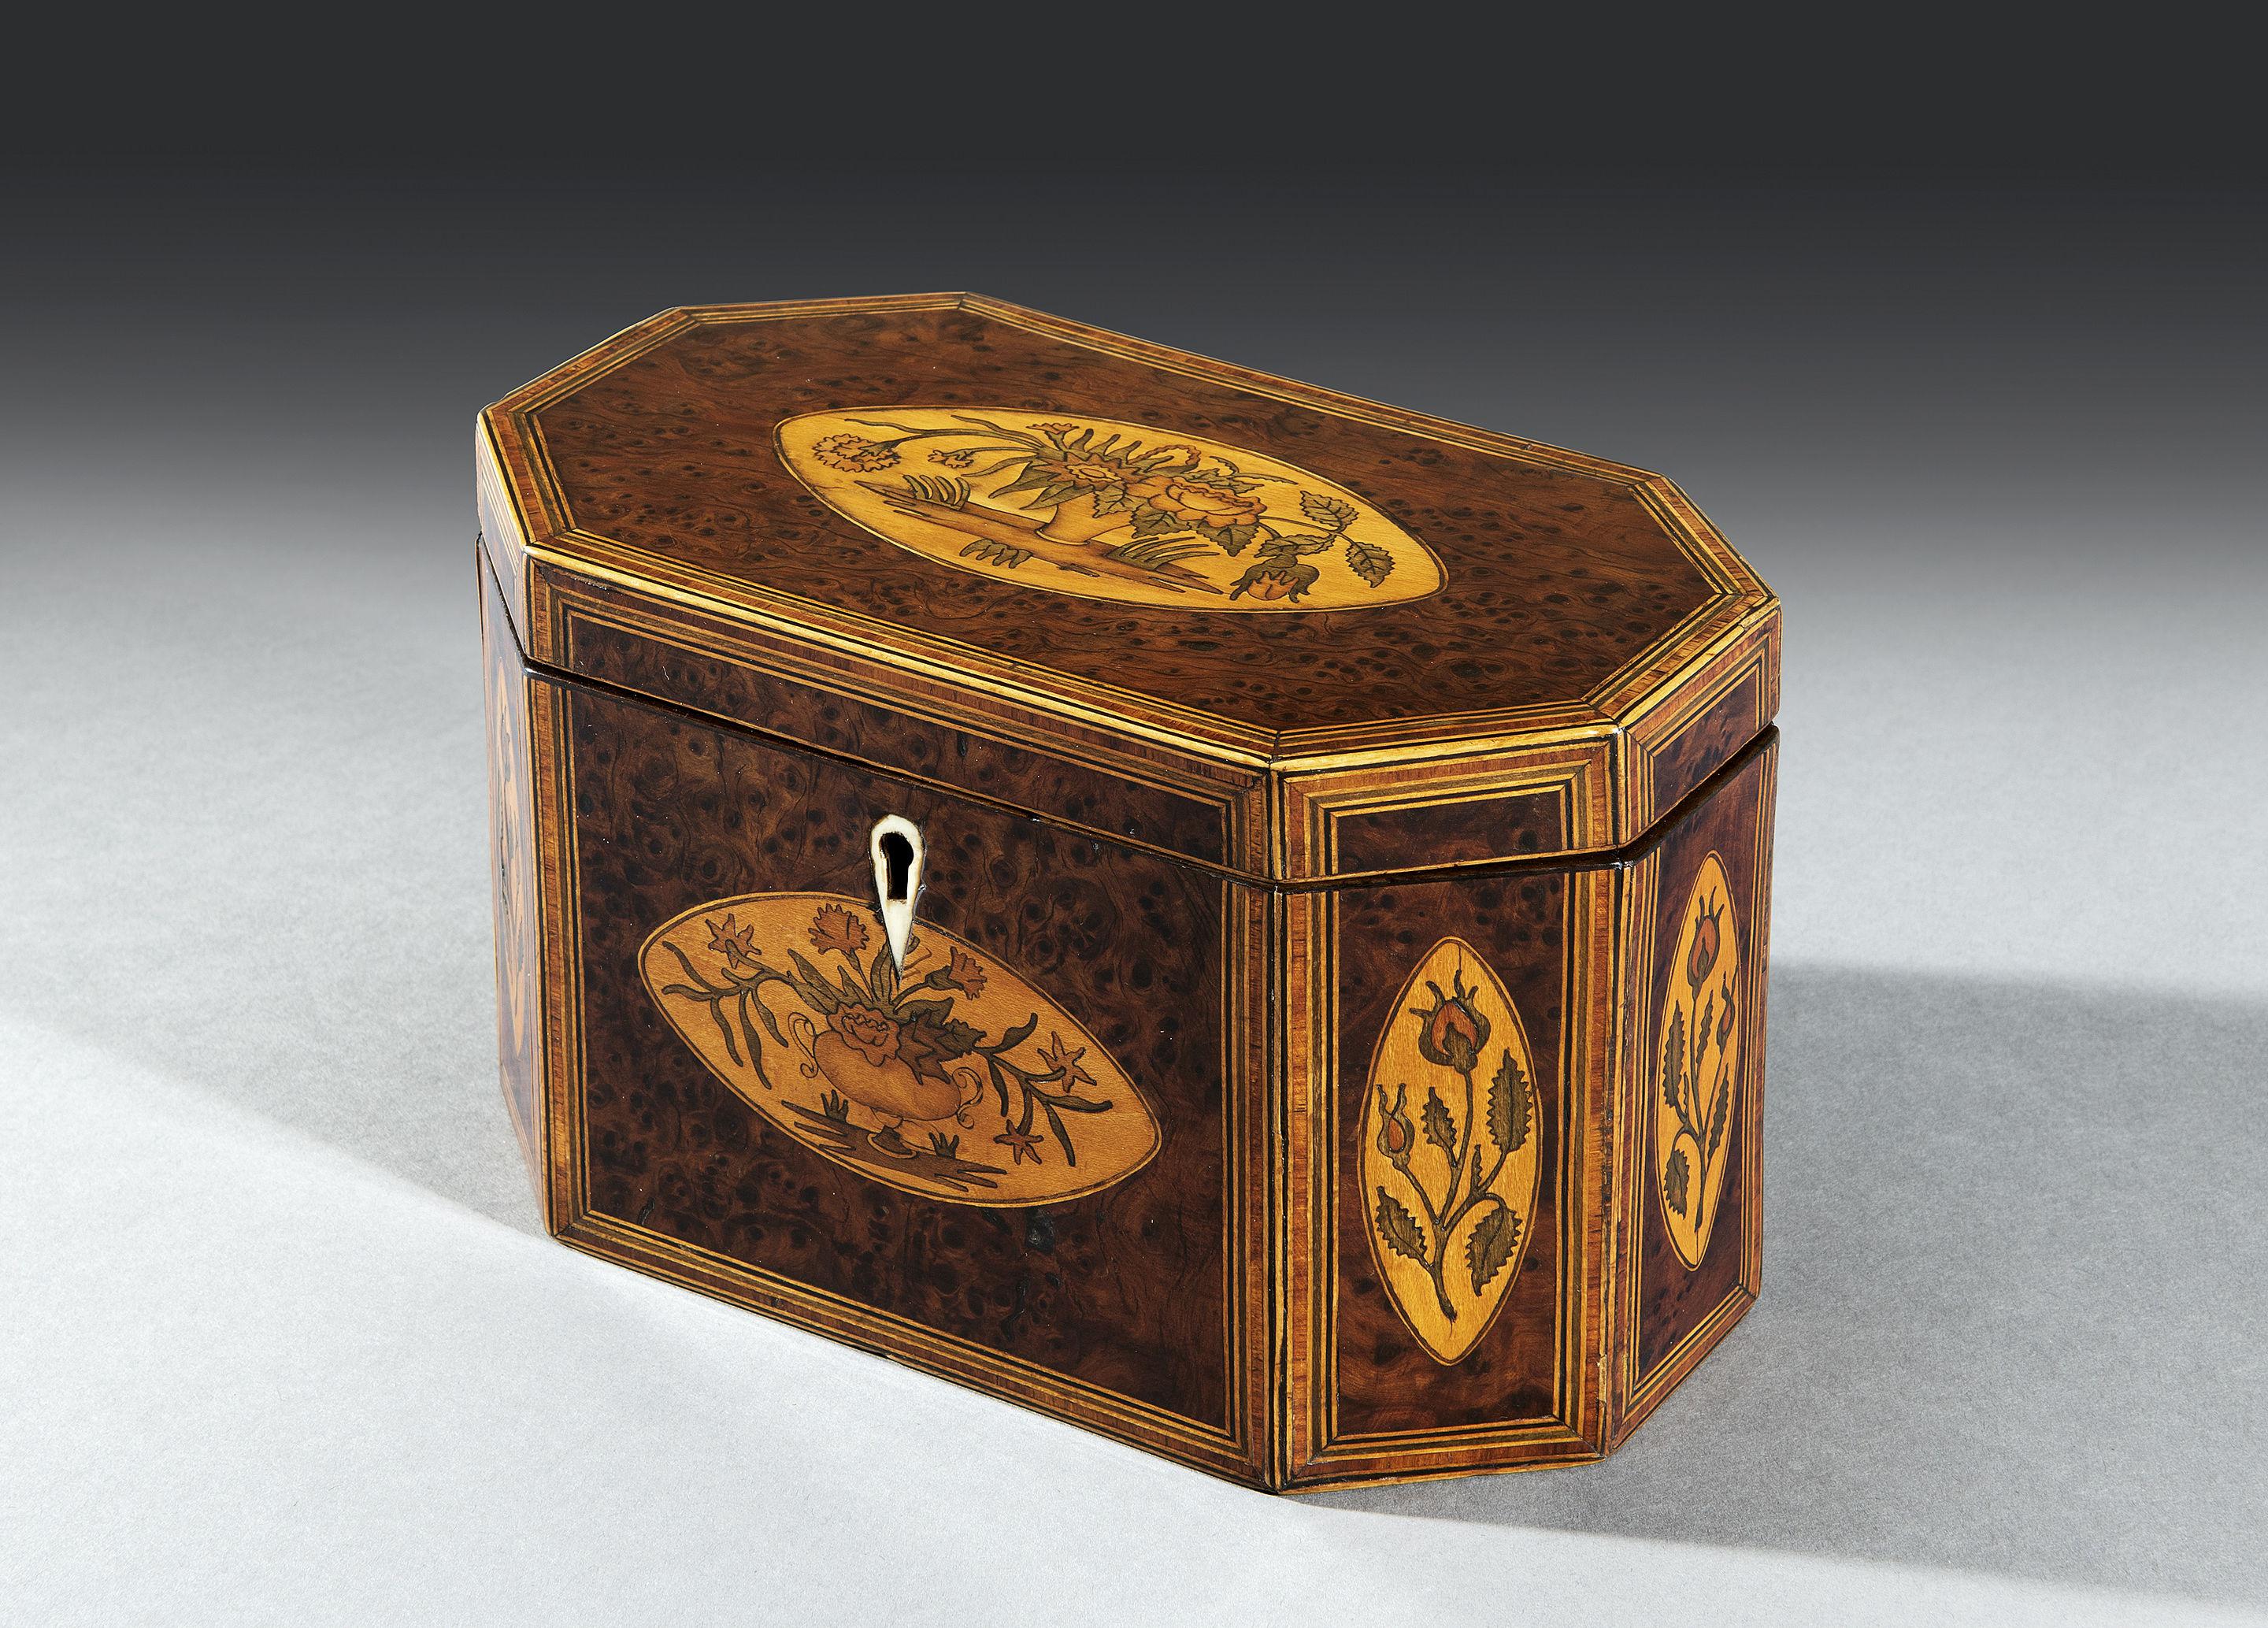 The burr yew octagonal top is triple banded and crossbanded with tulipwood, sycamore, boxwood and ebony stringing. The top is embellished with an oval inlaid floral marquetry bouquet design. This intricate banding is repeated on each side of the